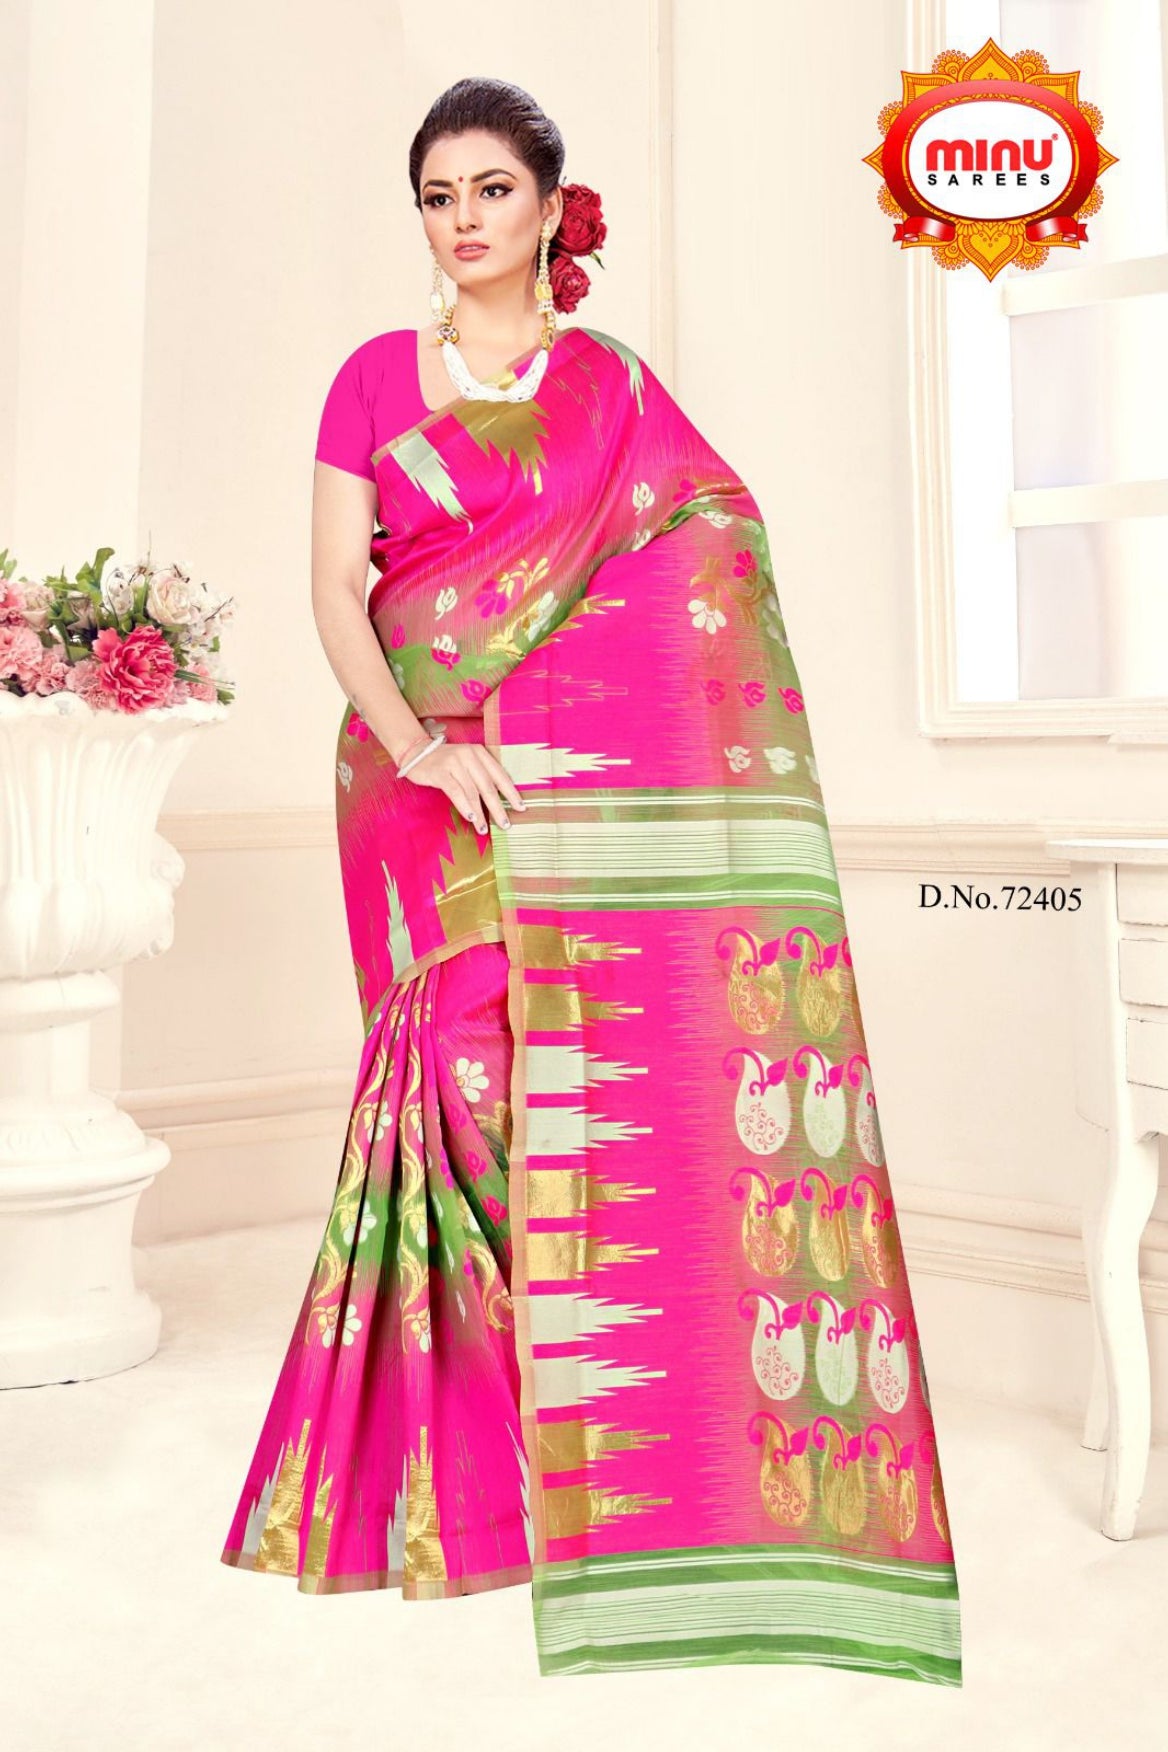 Best quality fancy saree wearing woman image